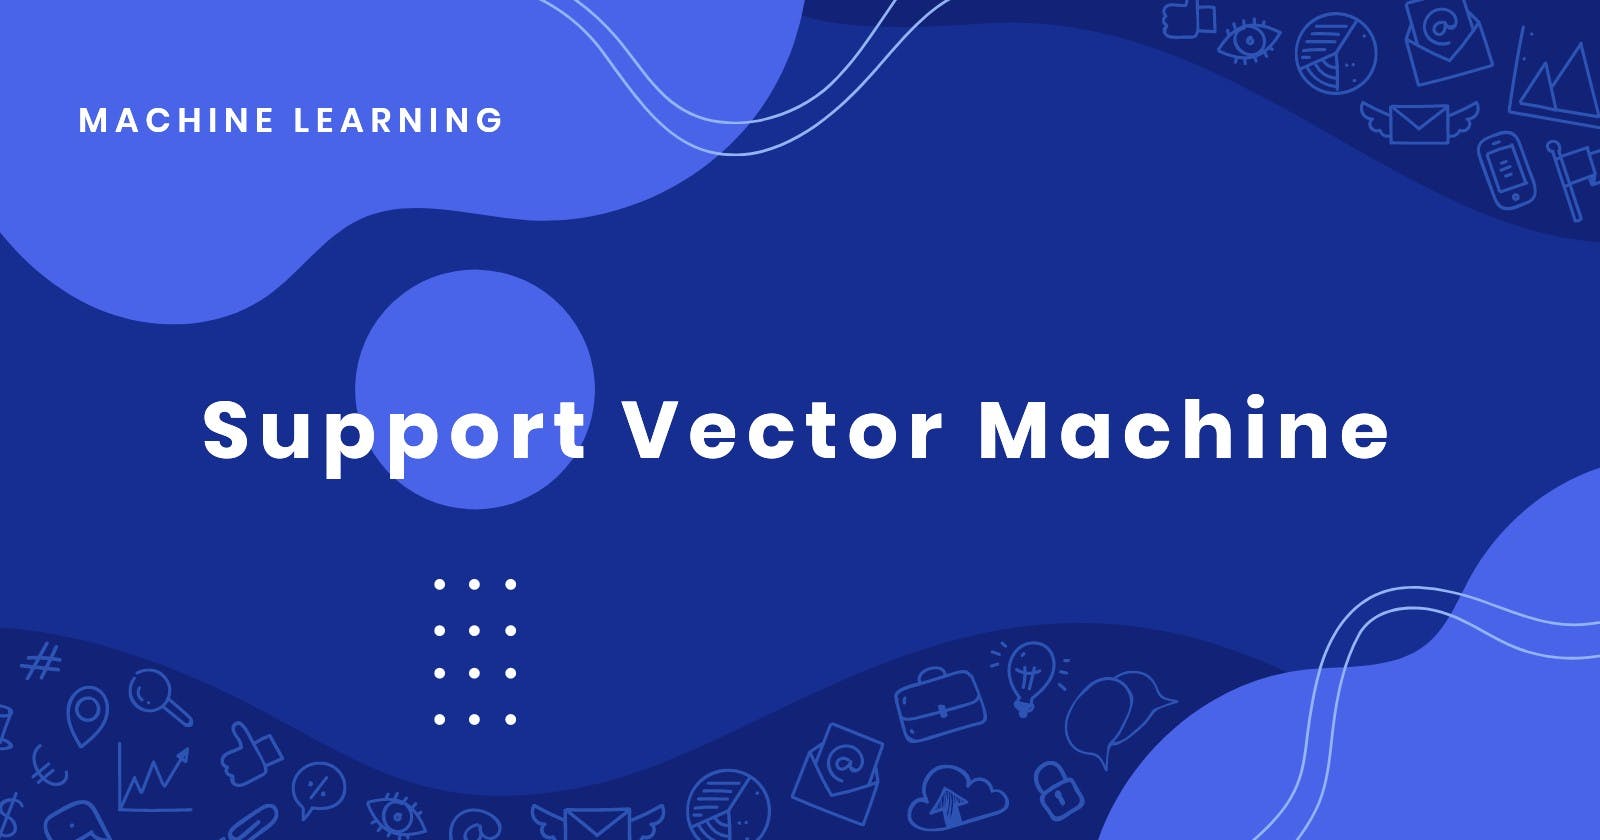 Support Vector Machines(SVMs)